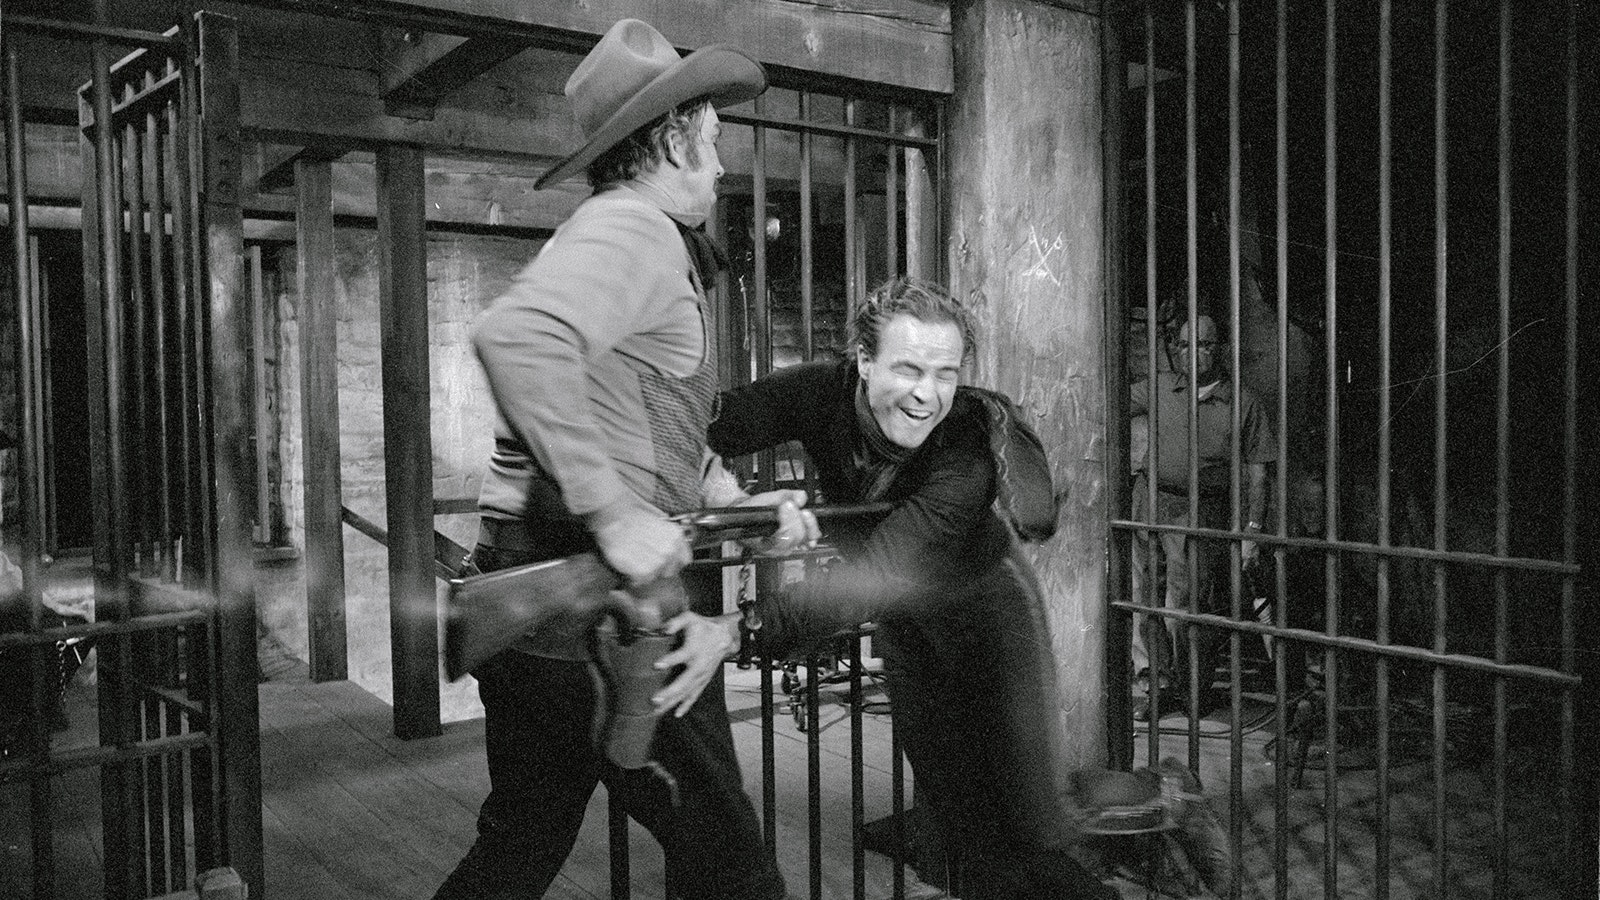 Realism gets too real for actor Marlon Brando in the Pennebaker-Paramount Western "One-Eyed Jacks" as he fights with actor Slim Pickens. Brando, facing the camera, is attempting a jailbreak, is spotted by Pickens, who hits him with the butt of his rifle. In the scuffle, Brando was gashed over the right eye, which required several stitches. Brando, who directed the picture, told the cameraman to print the shot as he did not want the realism lost.